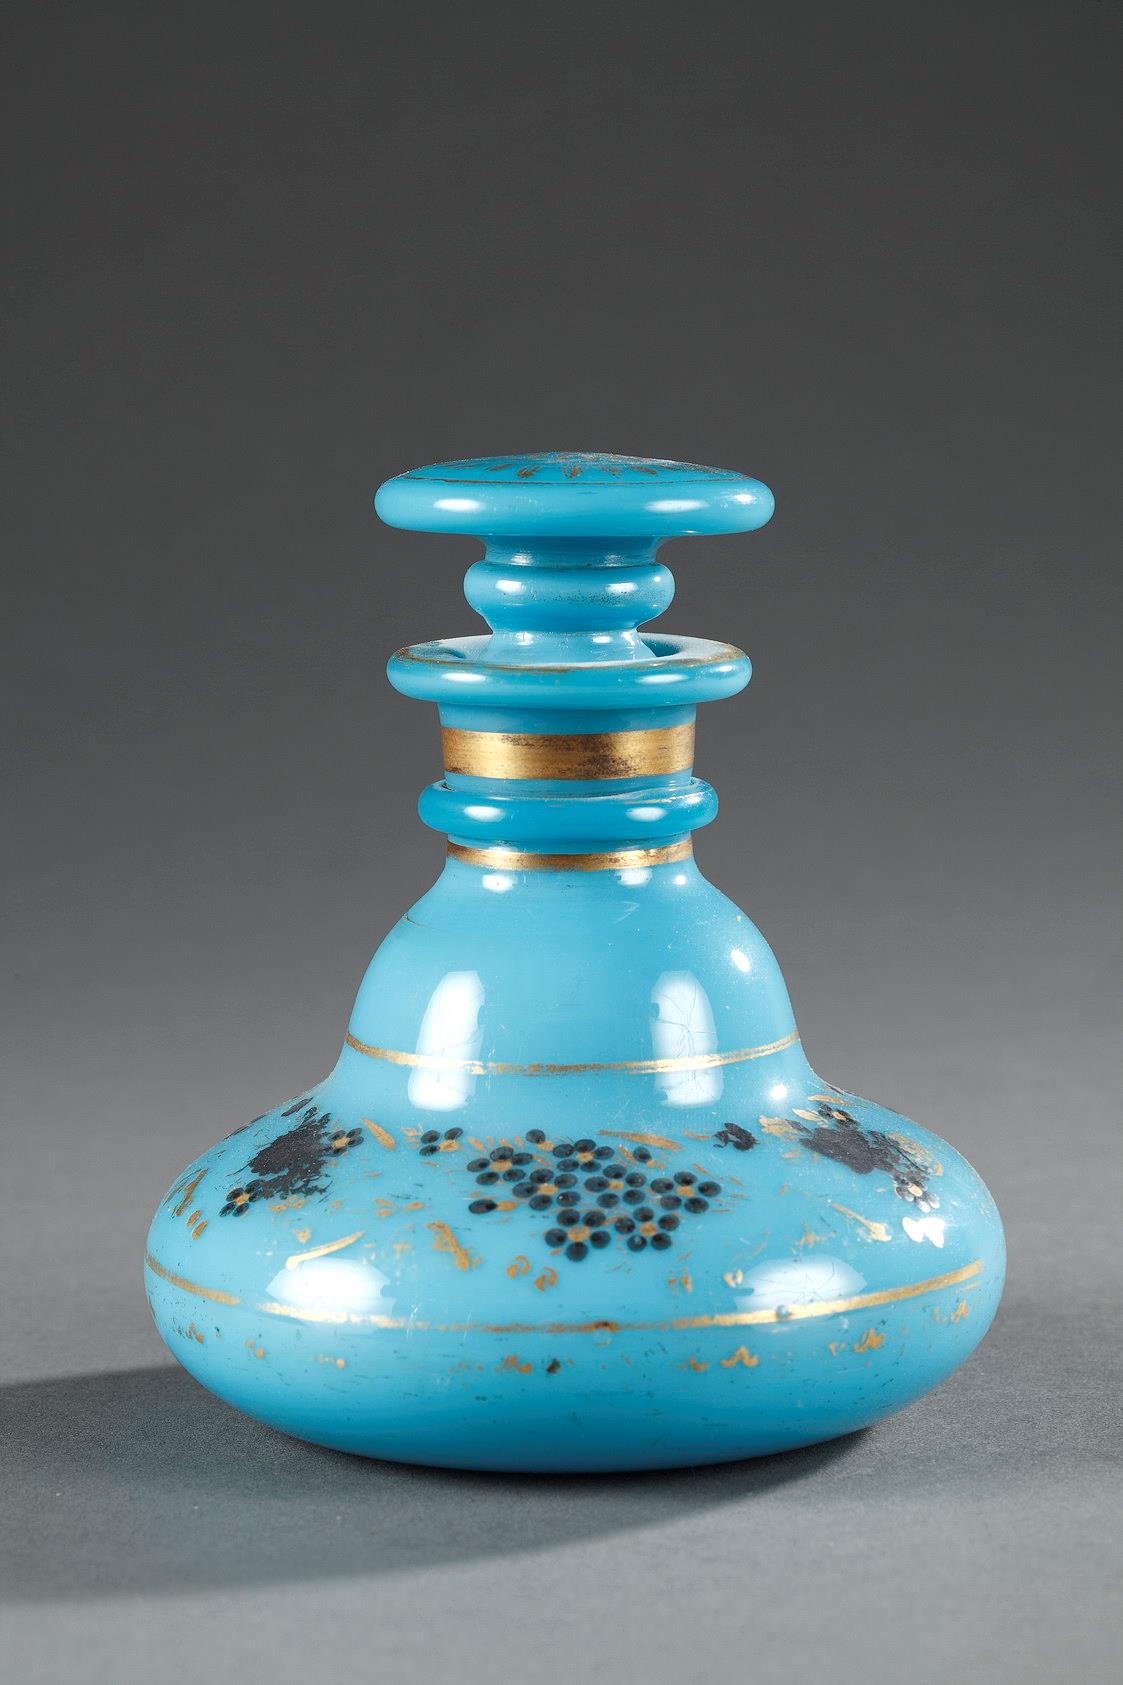 flask, opaline, criytal, opale, glass, blue, Charles, X, Restauration, 19th, century, turquoise, gold, floral, forget-me-nots, rose, perfum